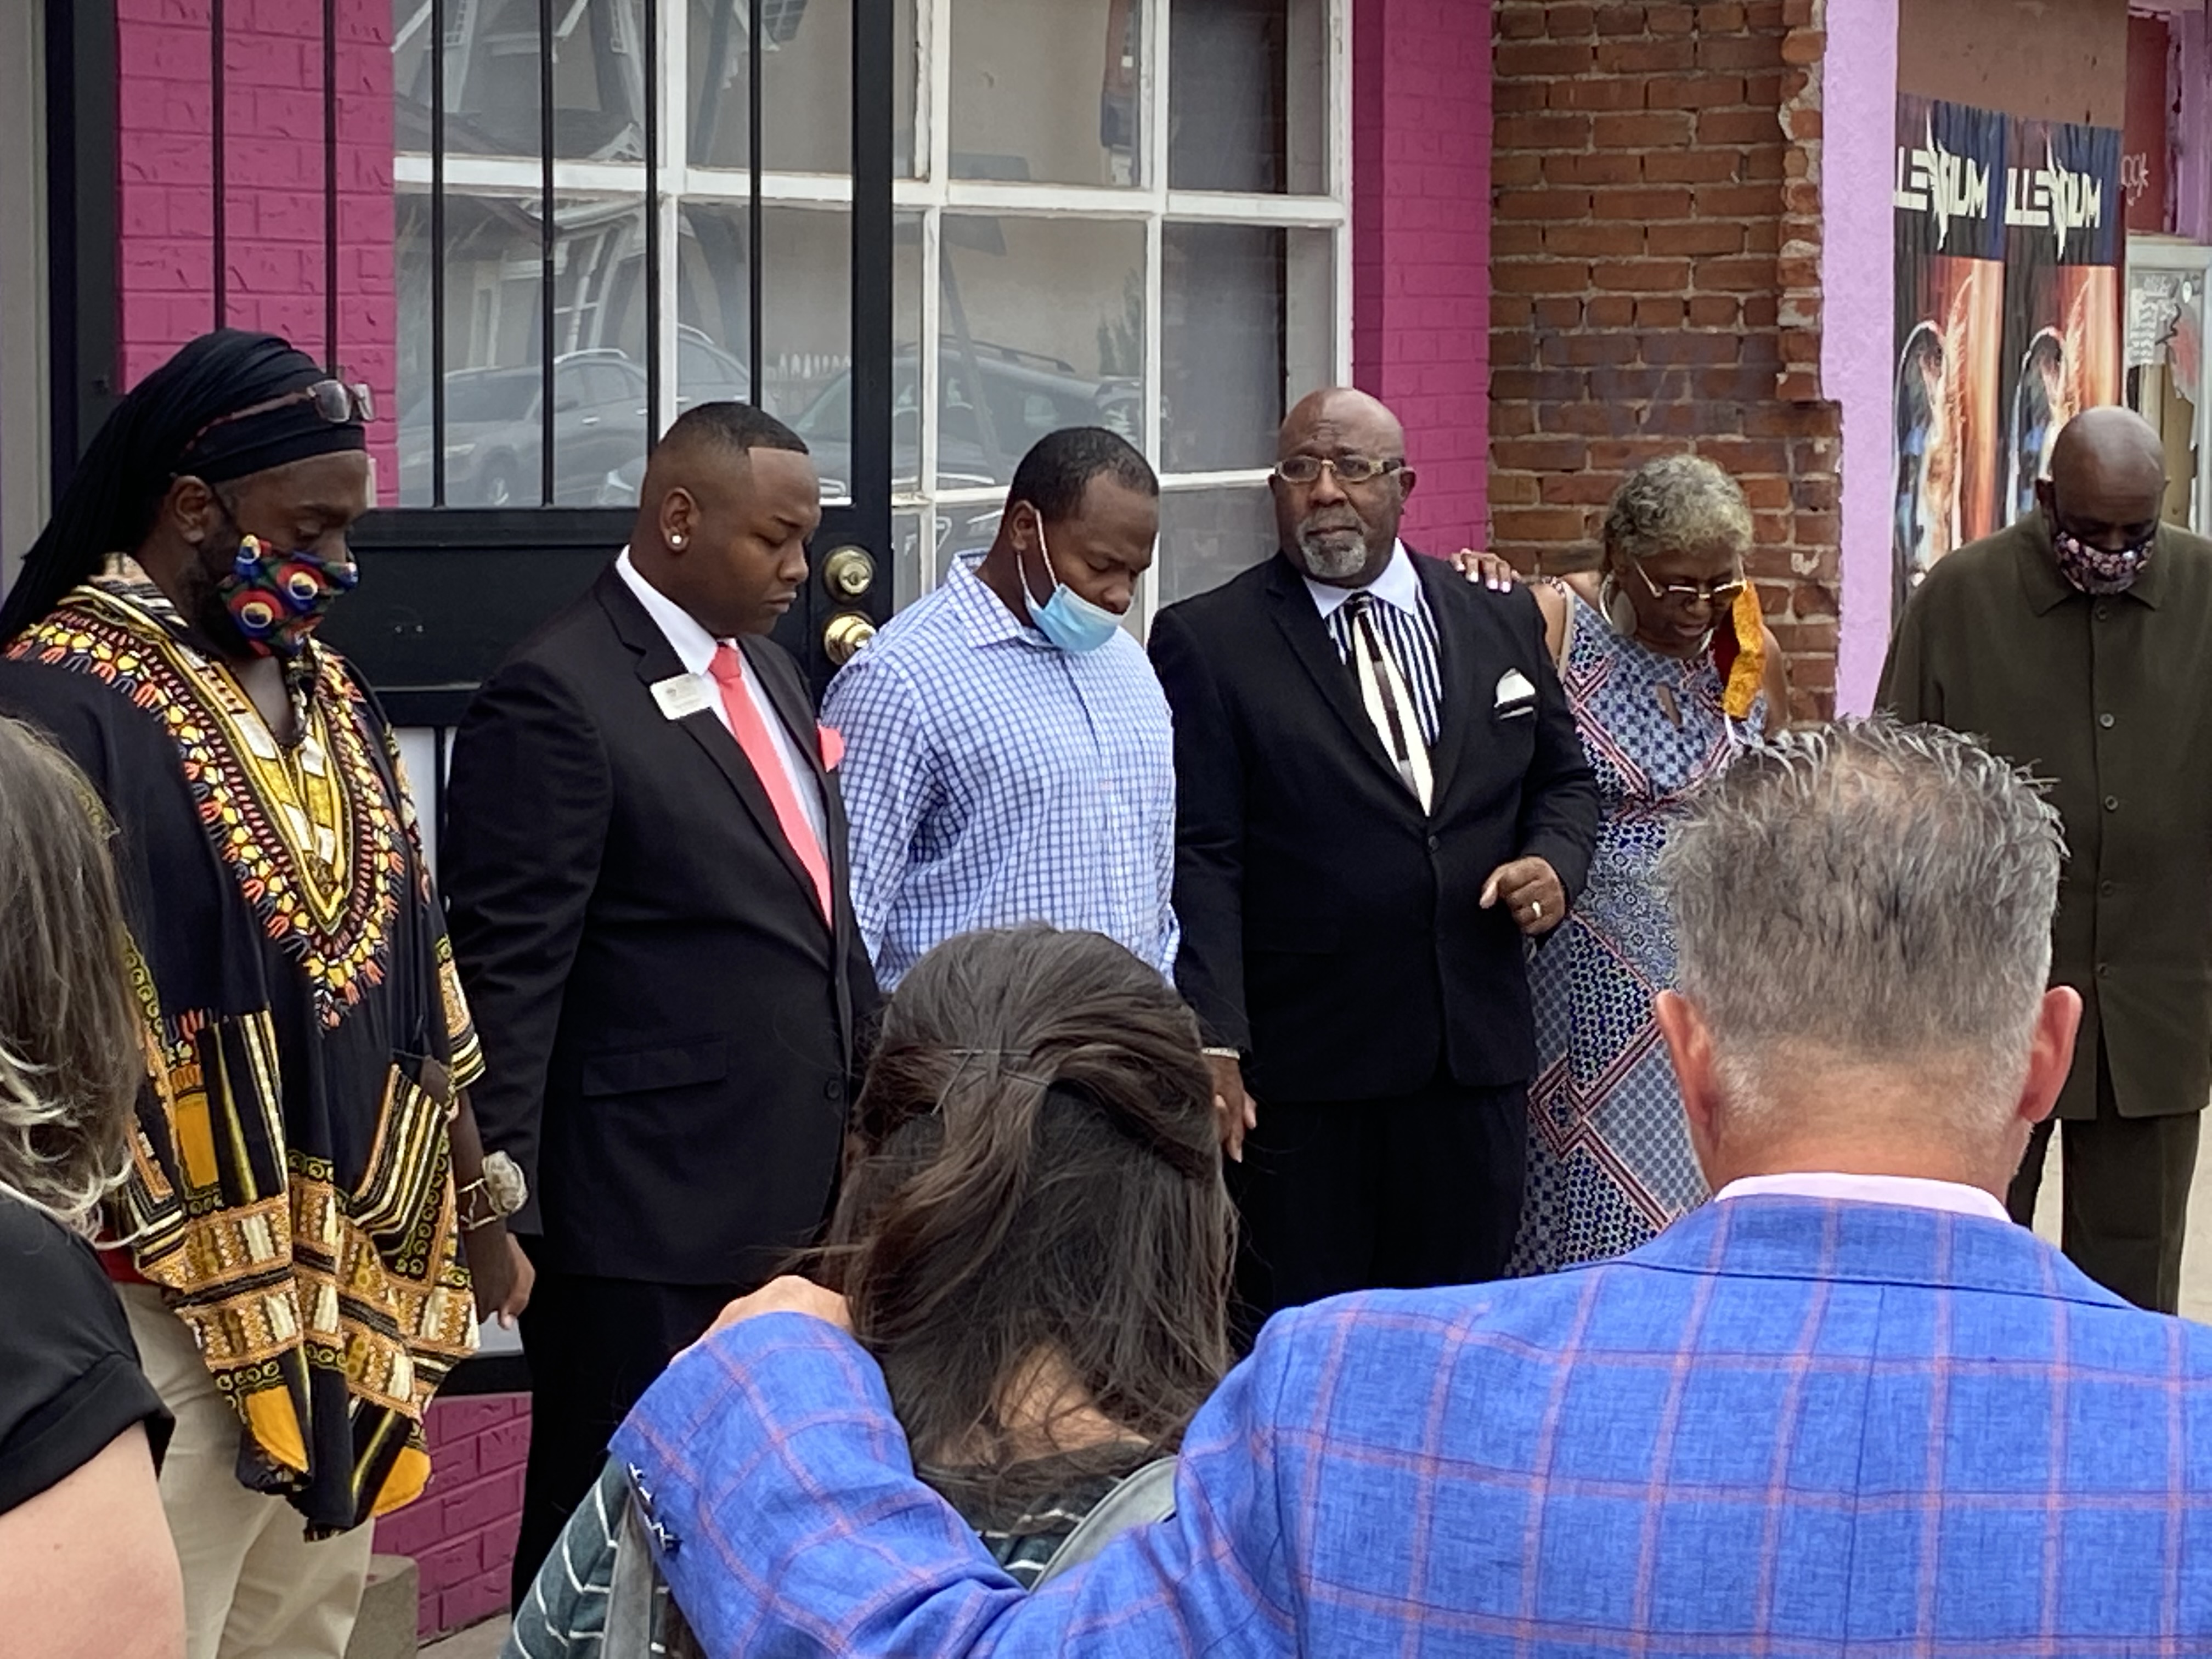 Denver school board member Tay Anderson, second from left, dressed in a suit and red tie, stands with his head bowed in prayer. He is standing in a circle of supporters holding hands.